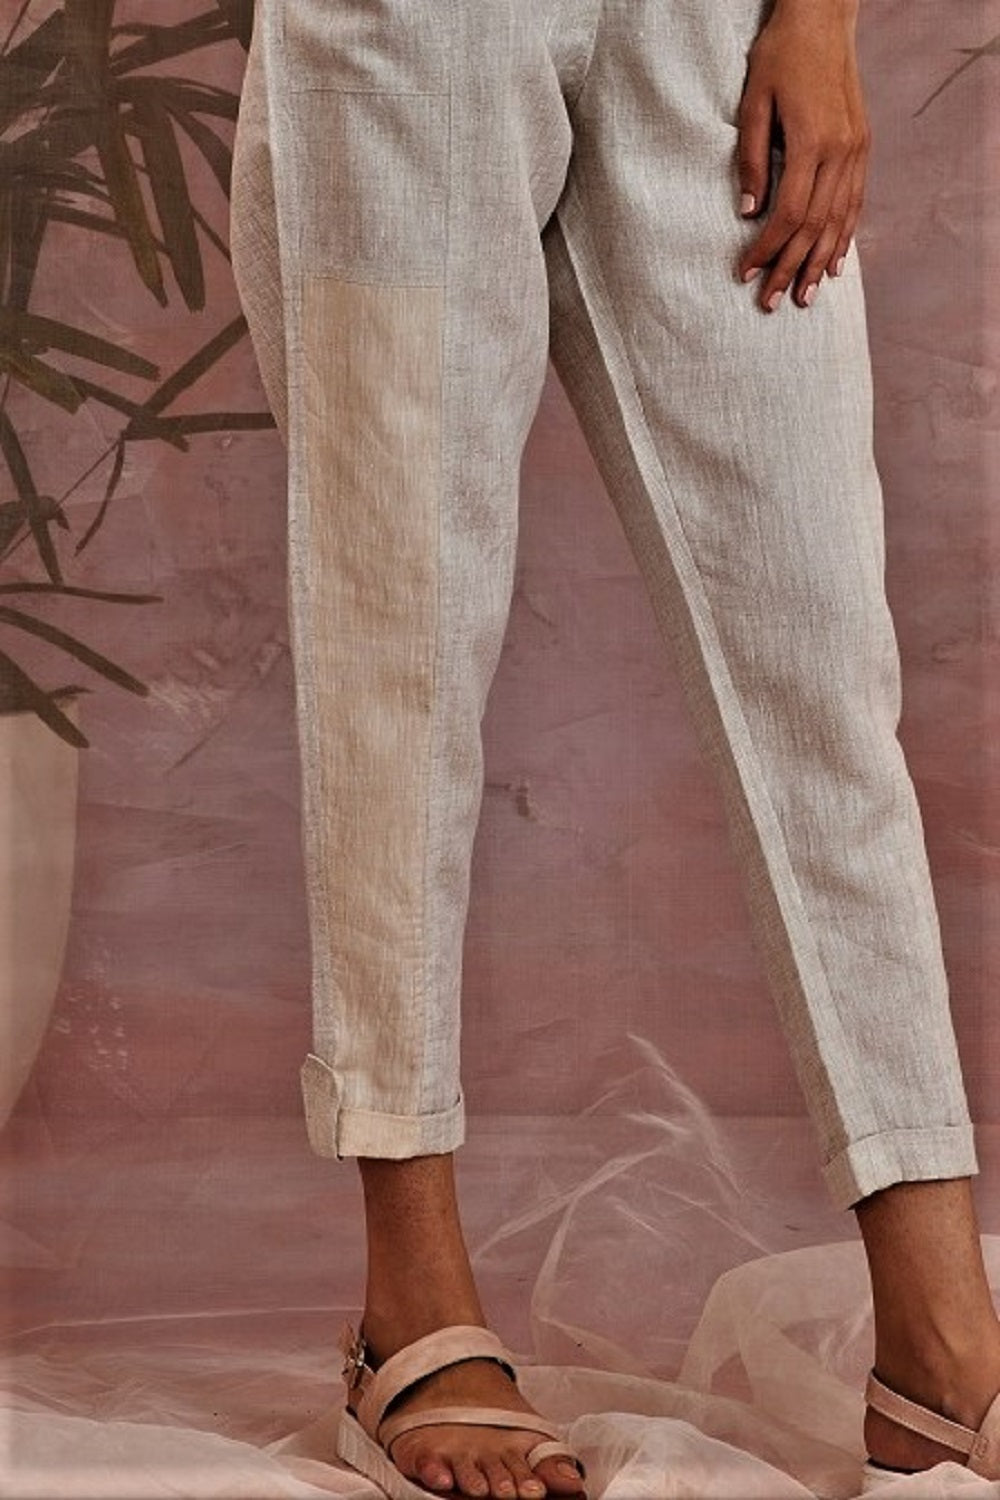 Multicolored Pocket Pants by Charkhee with Casual Wear, Cotton, Fitted at Waist, Natural, Pants, Pink, Regular Fit, Sun-dae by Charkhee, Textured, Womenswear at Kamakhyaa for sustainable fashion